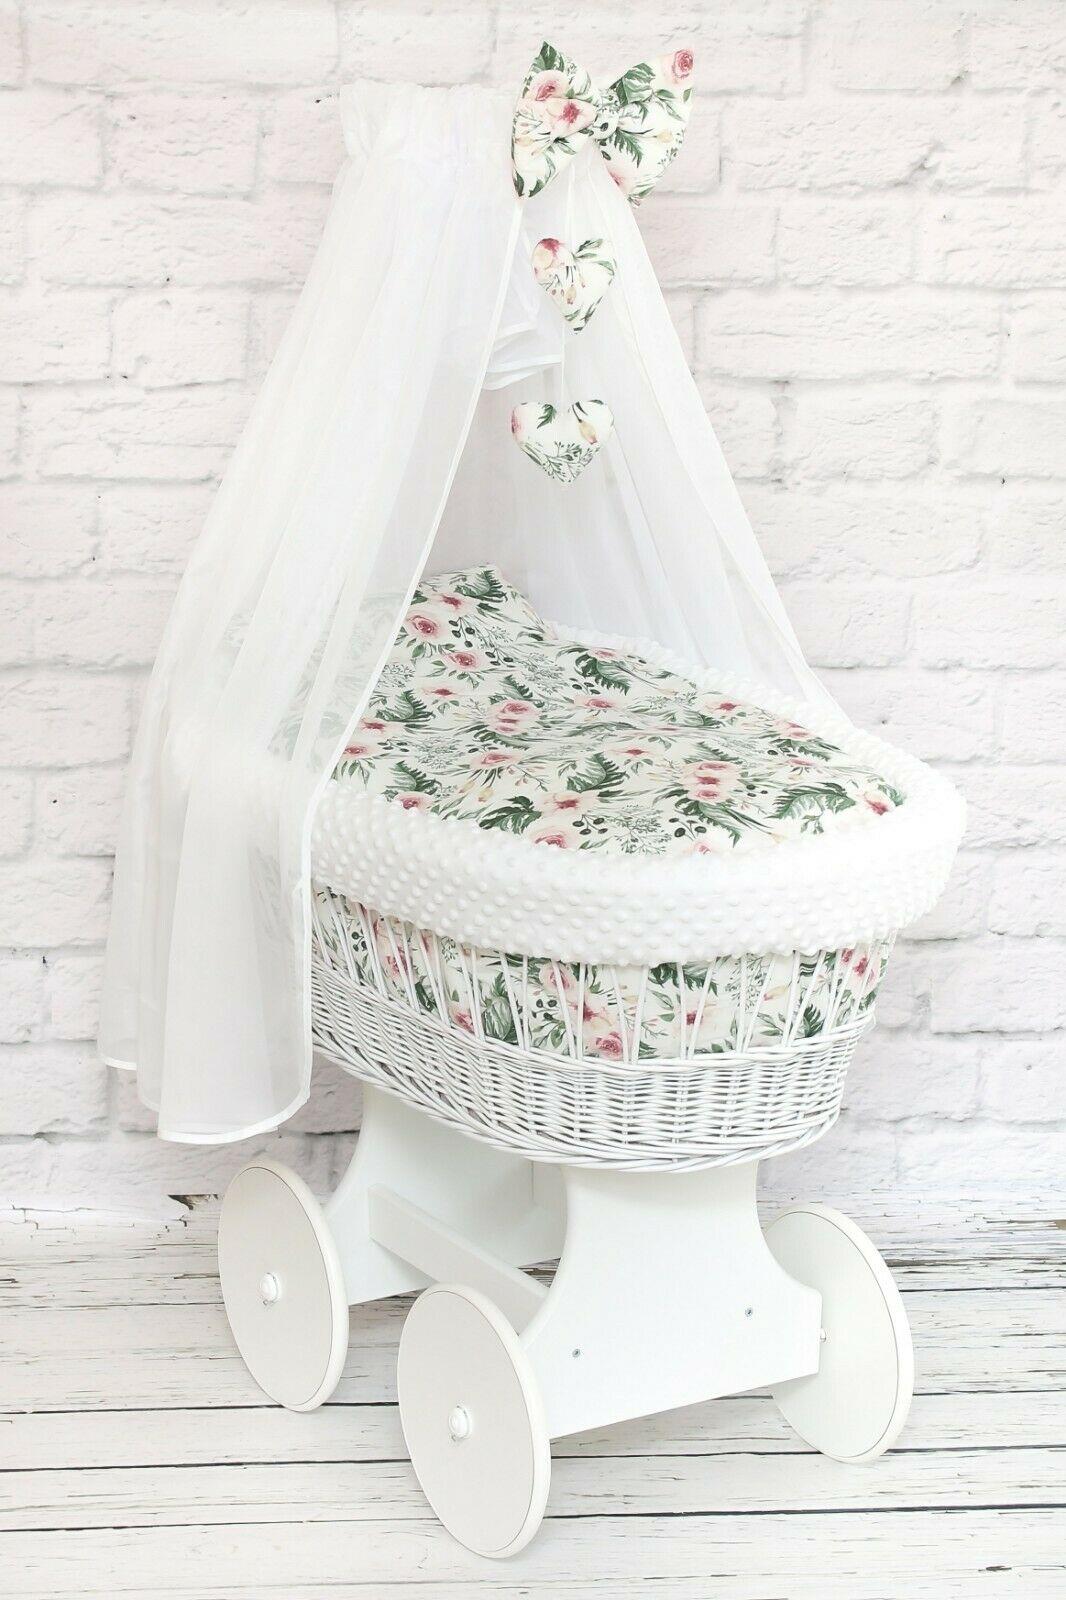 Full Bedding Set With Canopy To Fit Wicker Moses Basket Dimple Garden Flowers